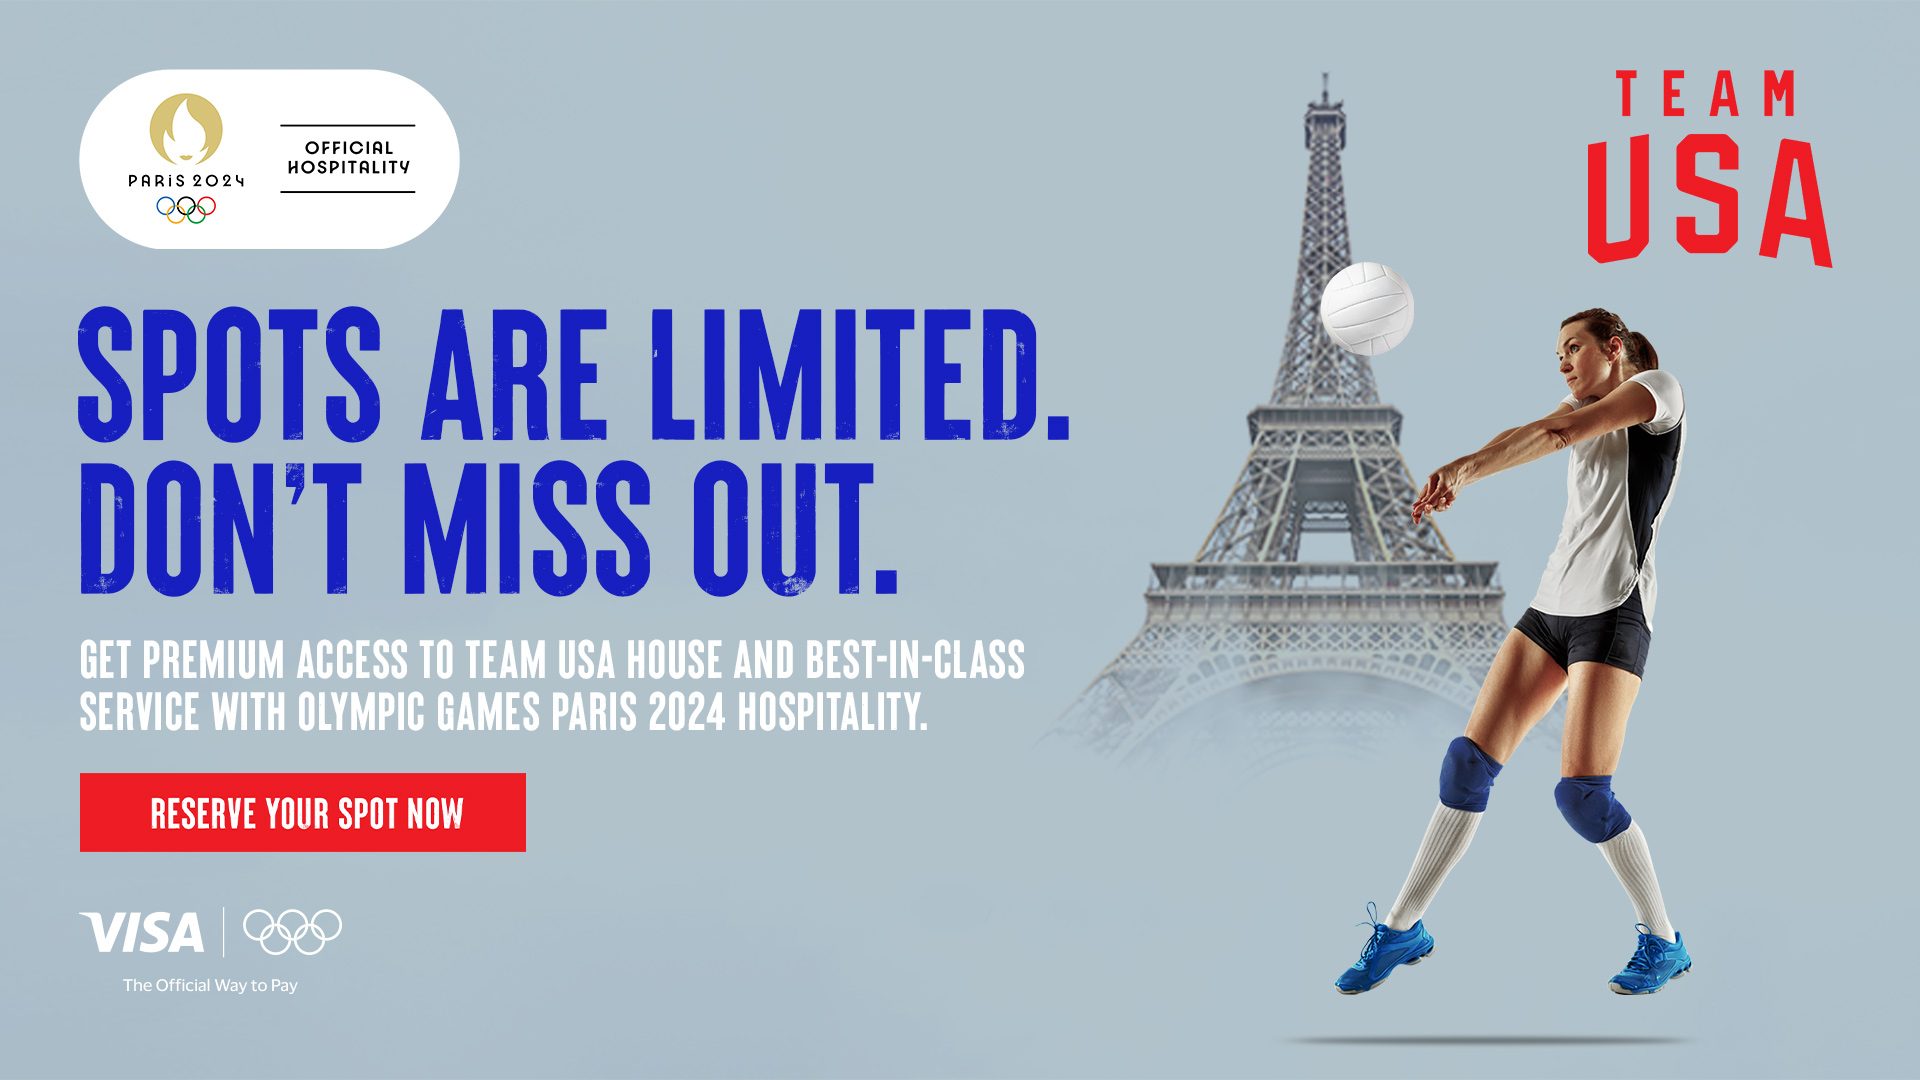 Spots are limited, don't miss out. Get premium access to Team USA House and best-in-class service with Olympic Games Paris 2024 Hospitality from Team USA. Reserve your spot now.